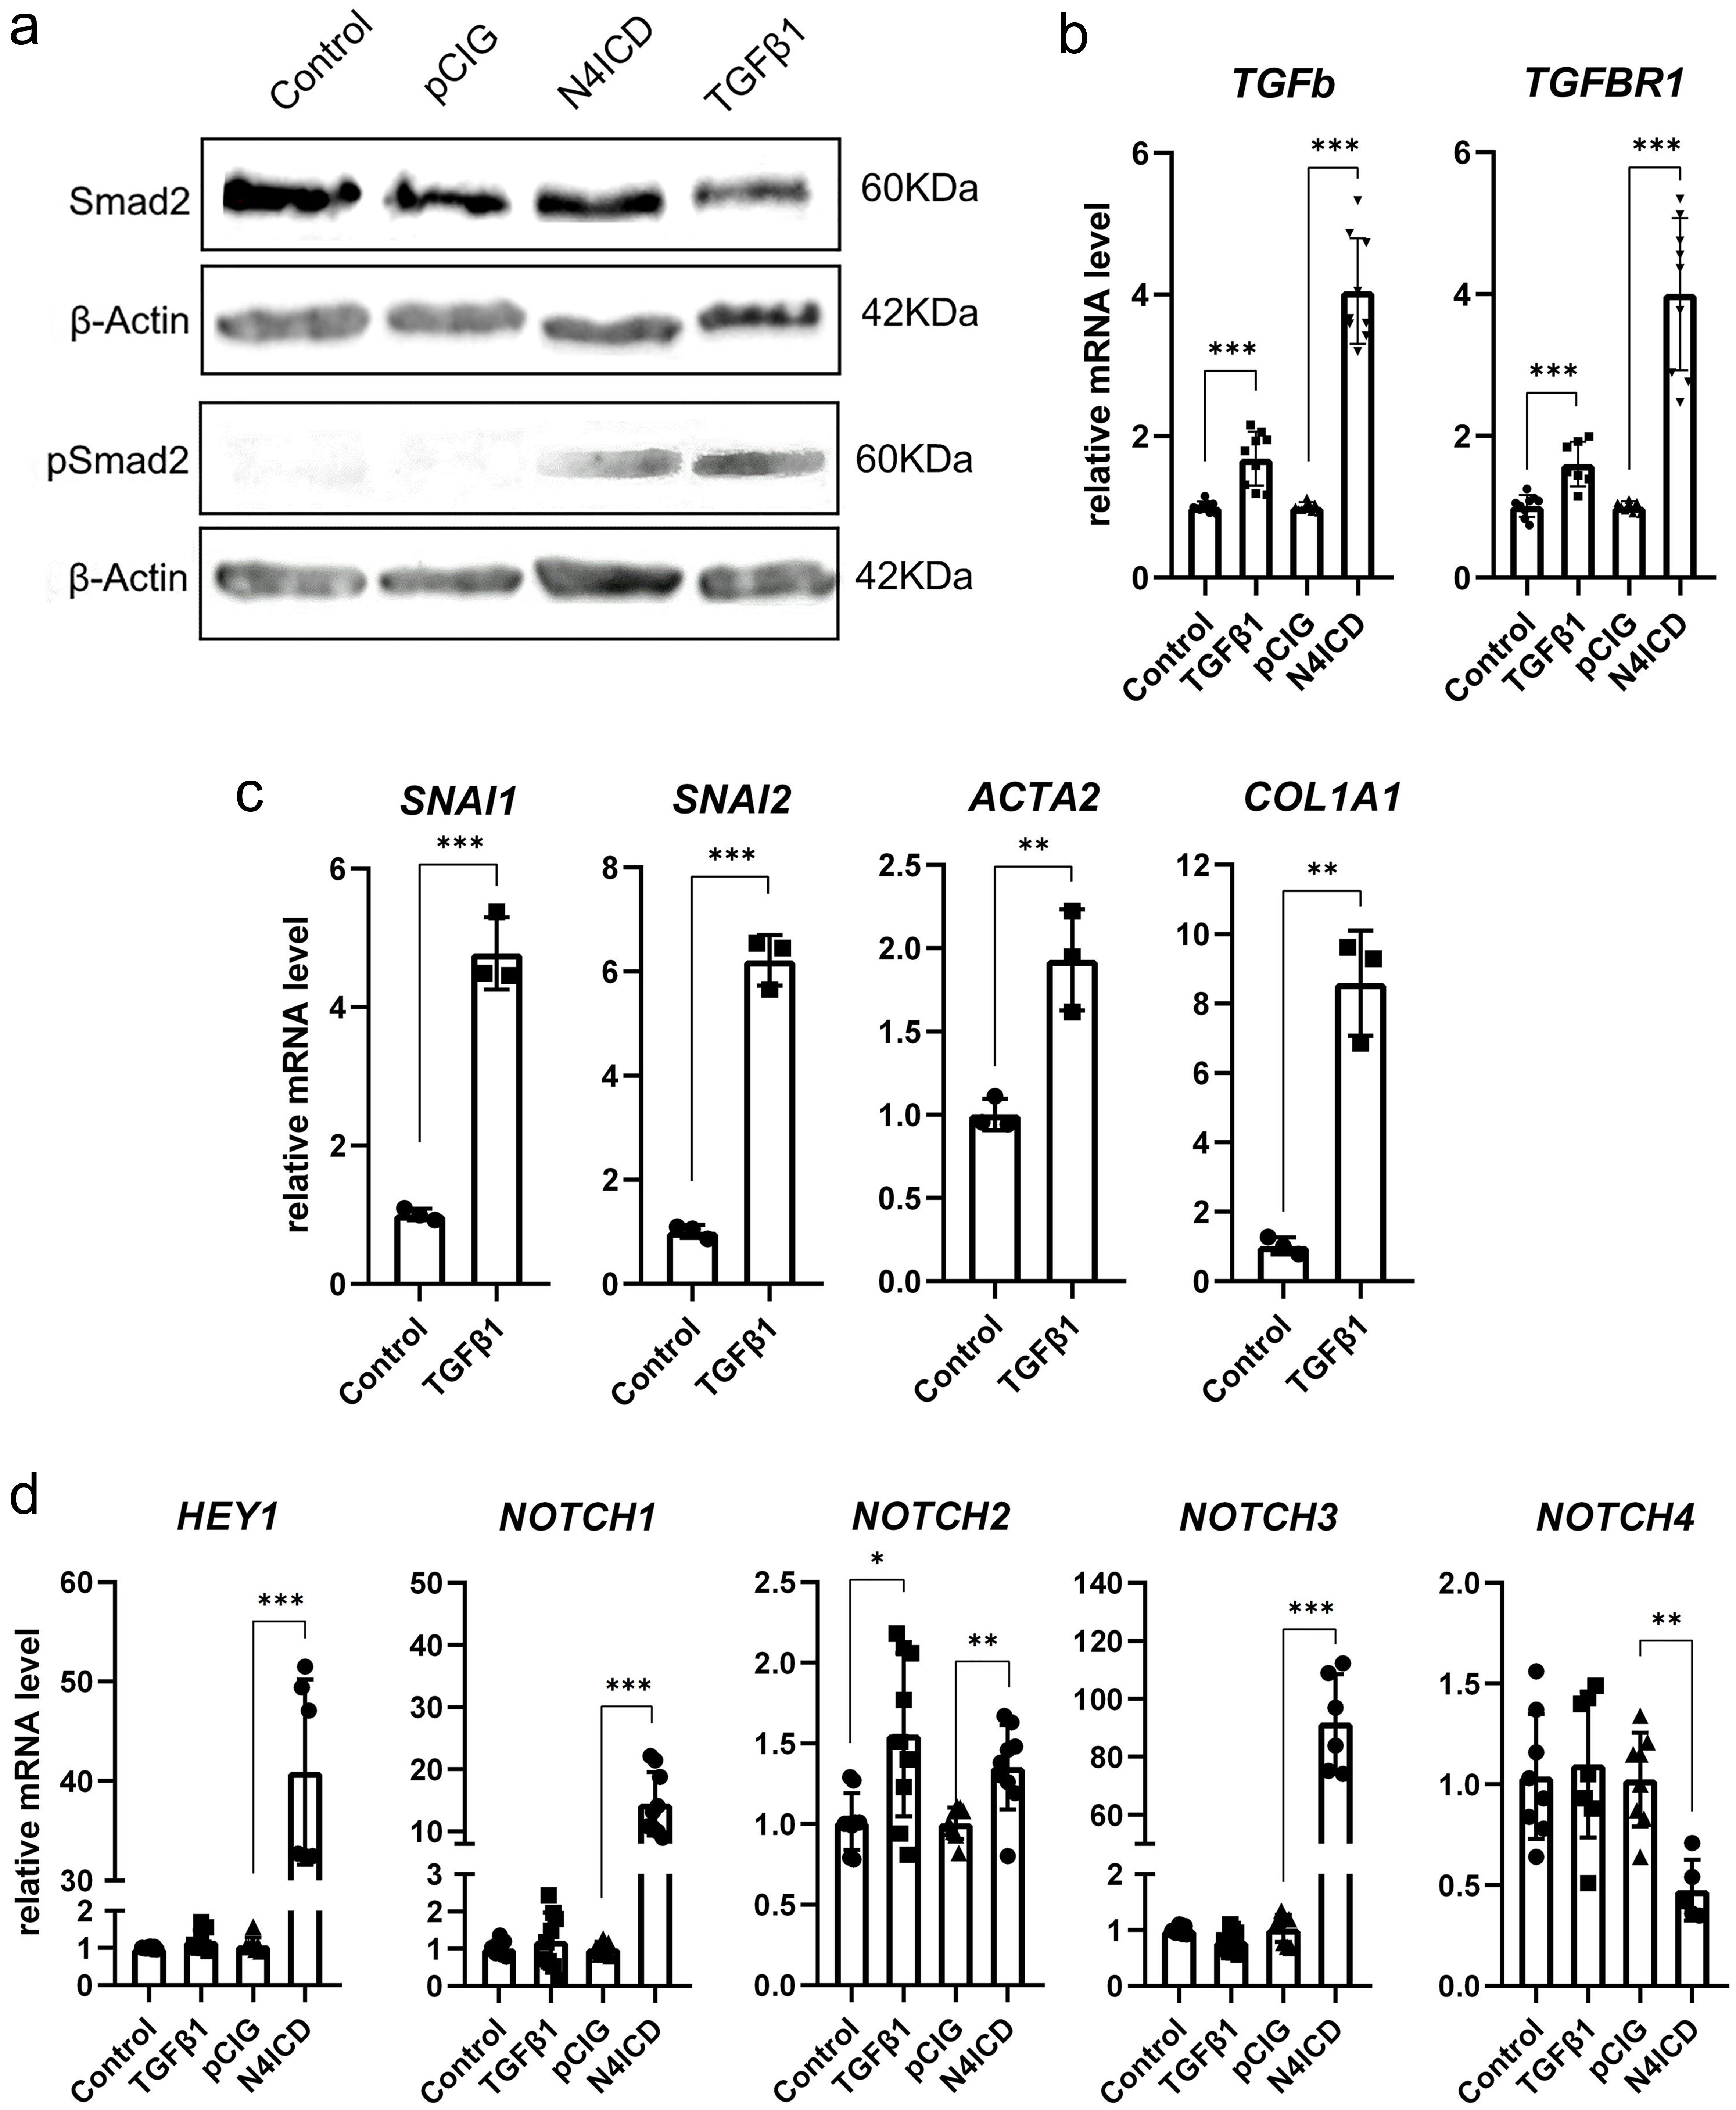 The reciprocal impact of Notch4 and TGFβ1 pathways on each other.